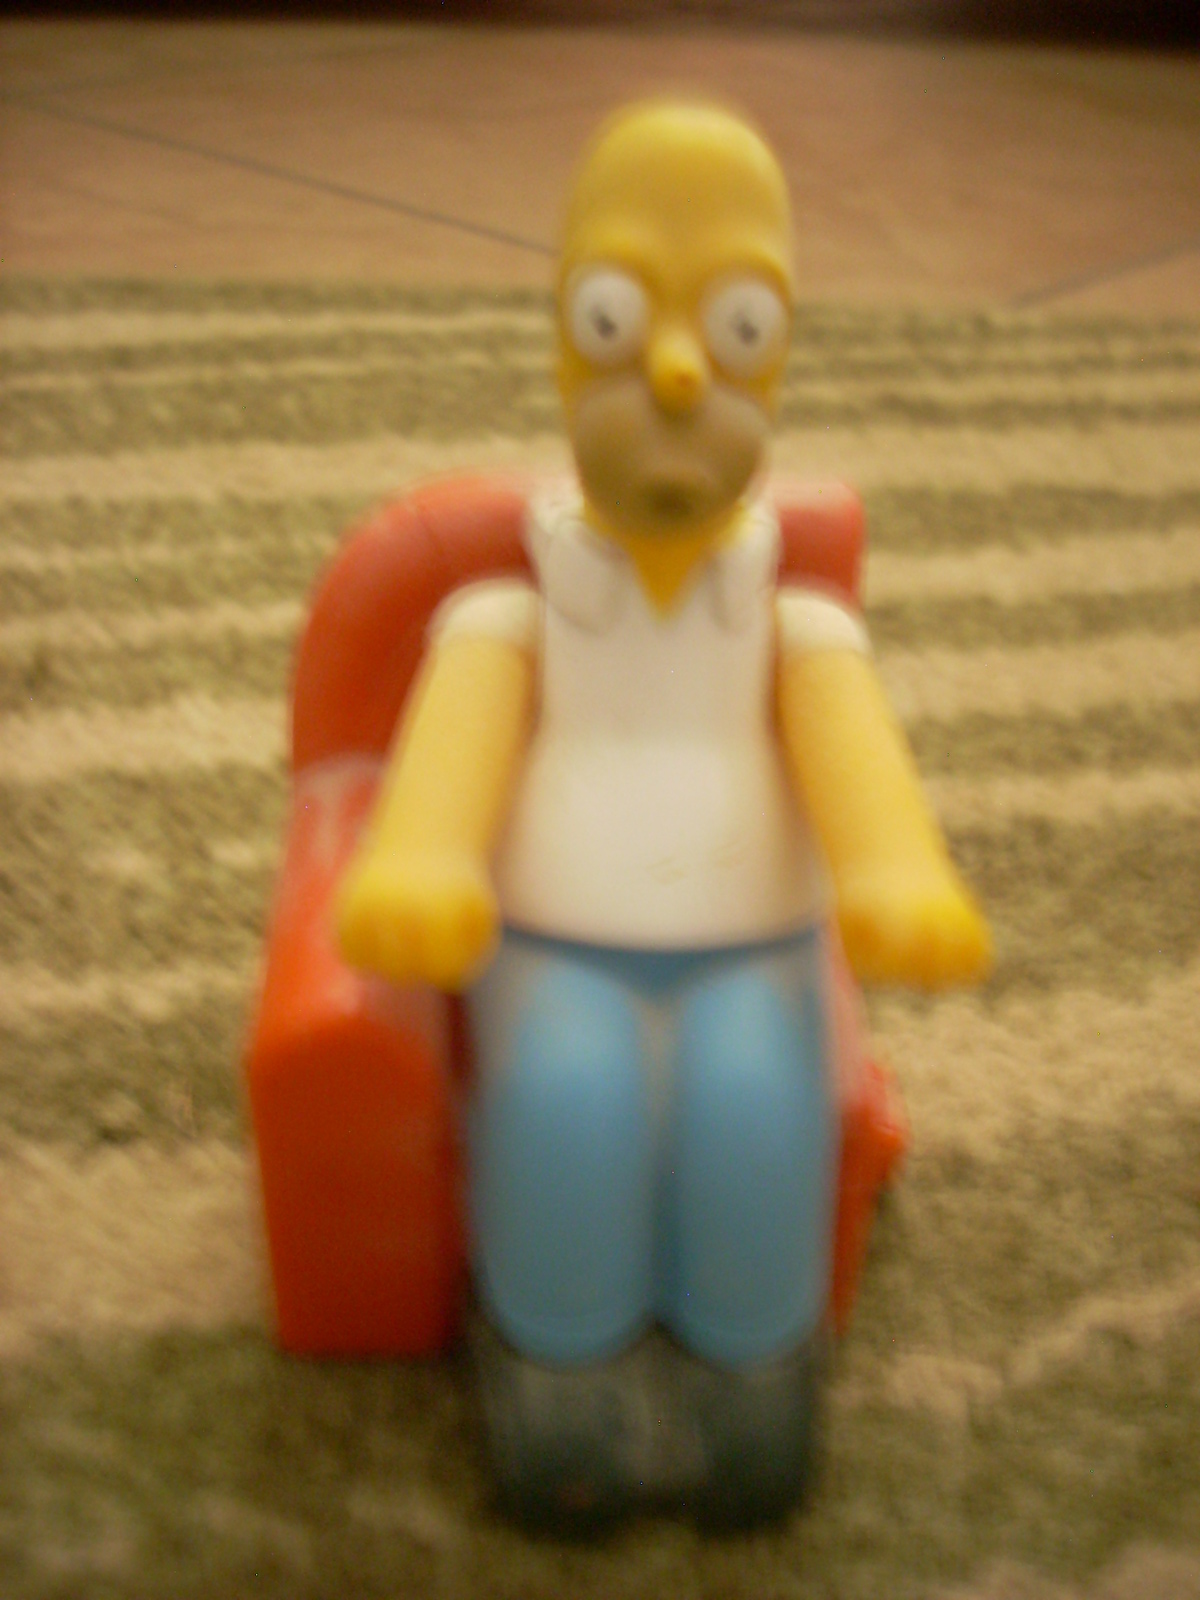 Homer Simpson plastic figurine arms go up and down - $10.00